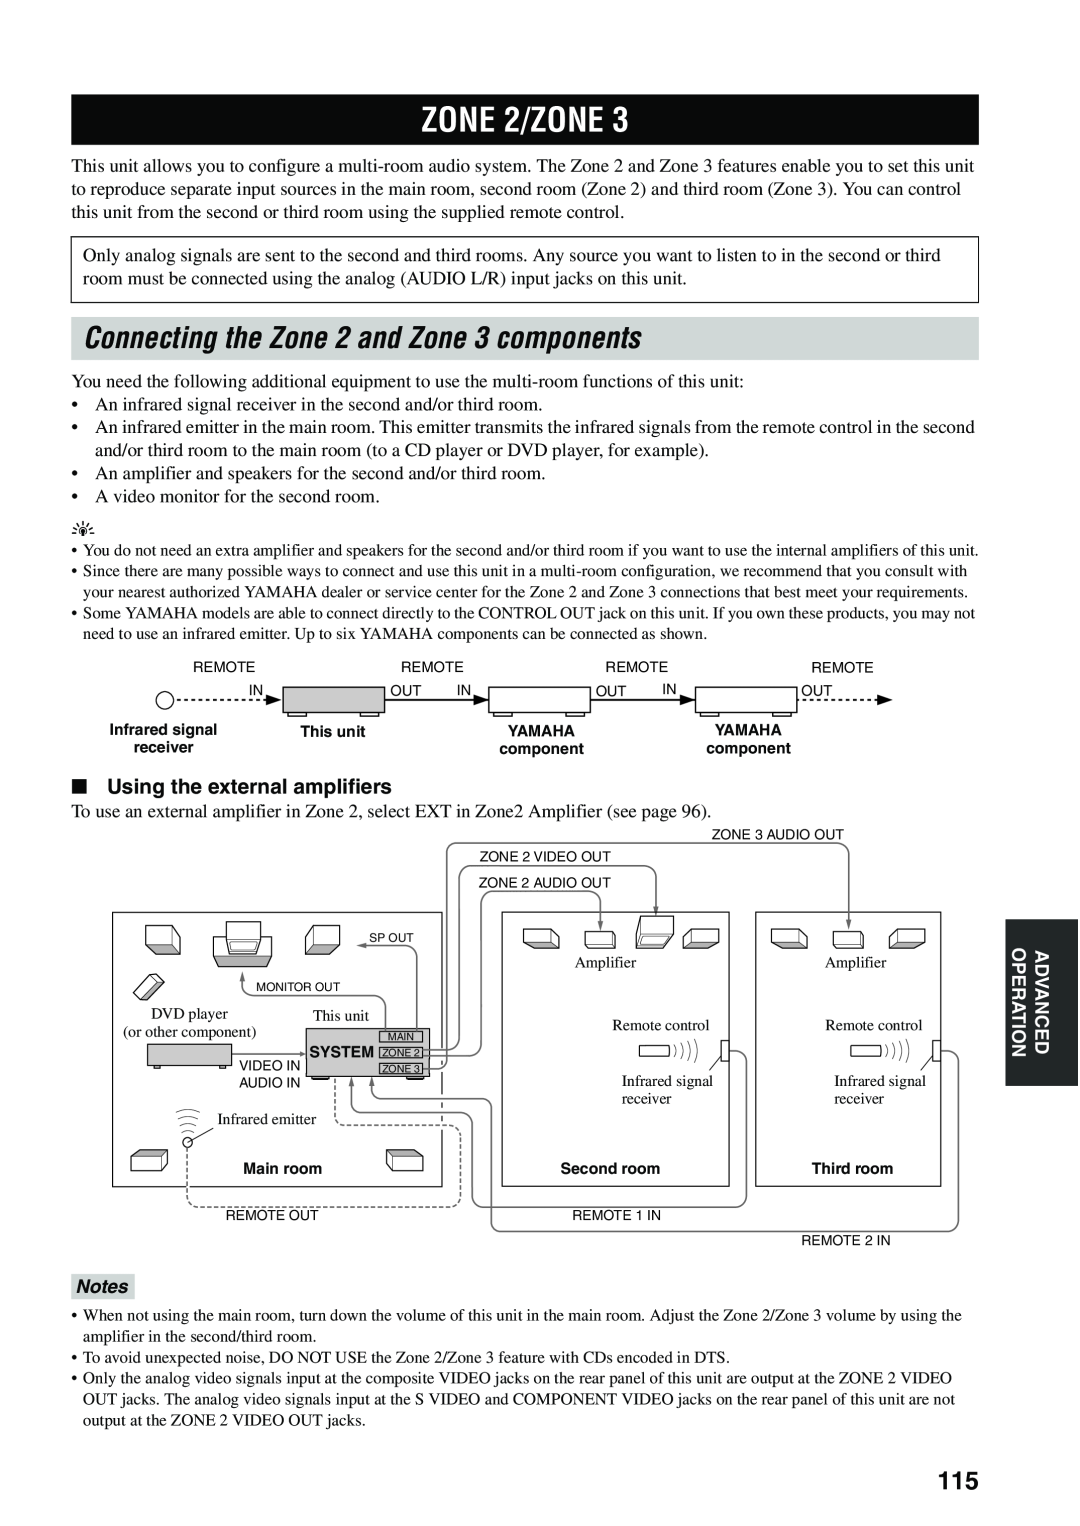 Yamaha X-V2600 owner manual ZONE 2/ZONE, Connecting the Zone 2 and Zone 3 components, Using the external amplifiers, Notes 